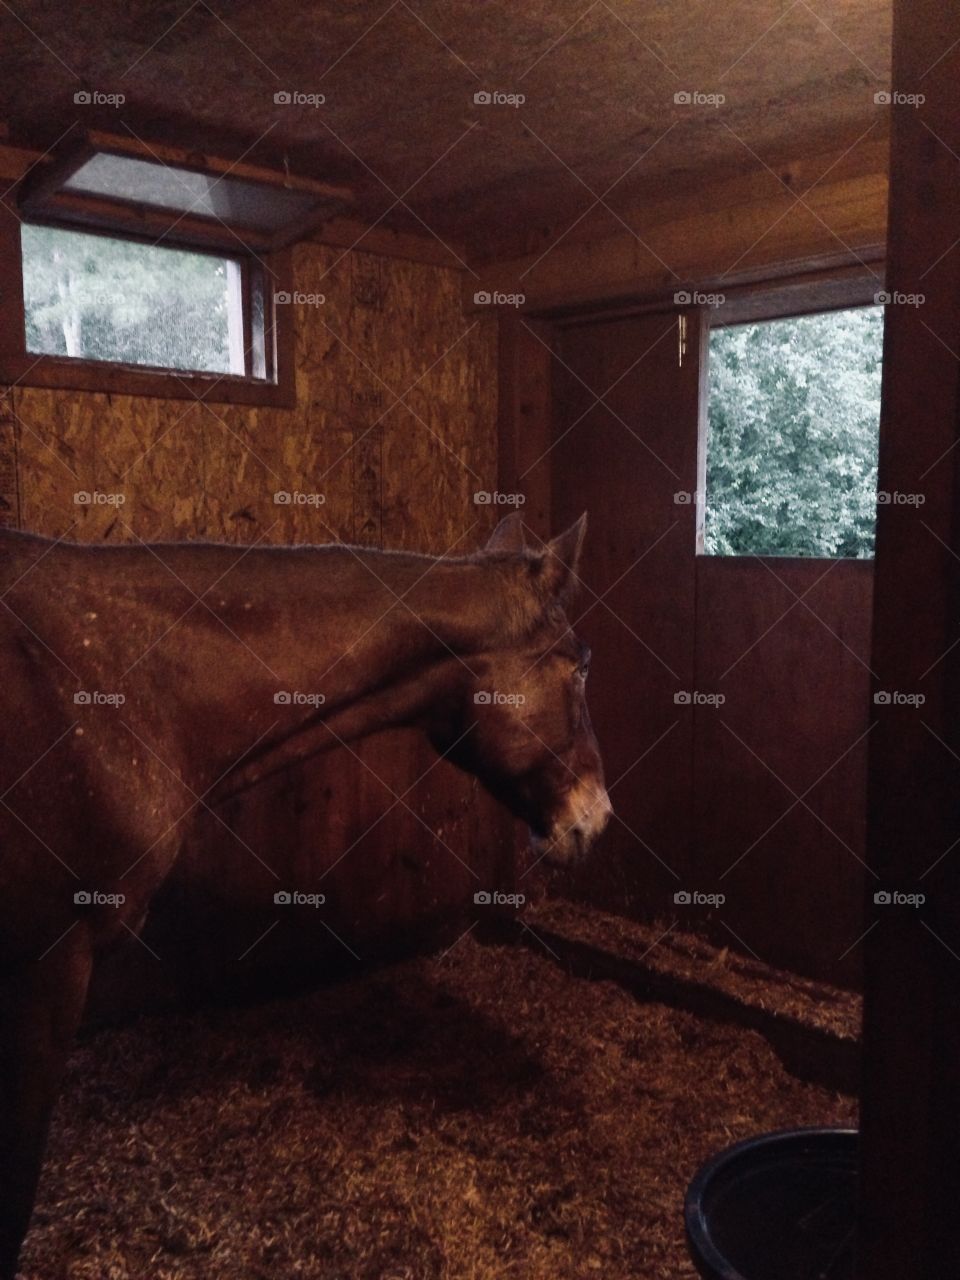 Appaloosa gazing dreamily out of the stall window 